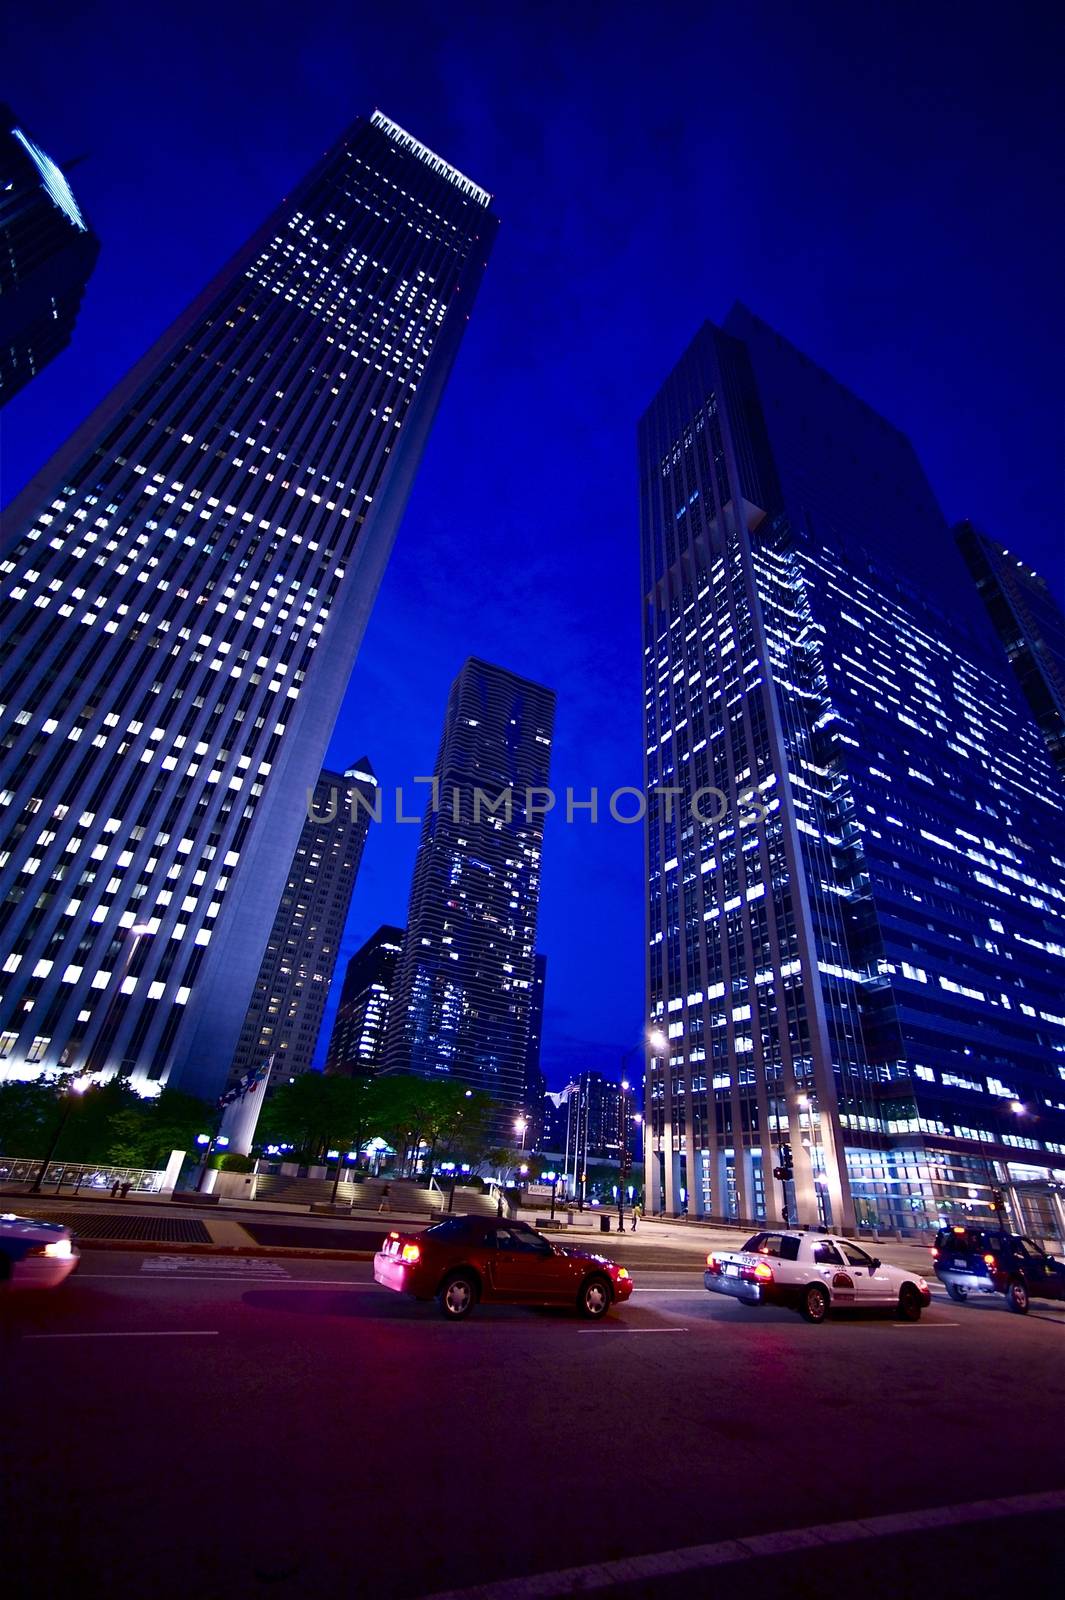 NIght Sky - Chicago Skyscrapers by NIght. Photo Taken From Millennium Park. Chicago USA